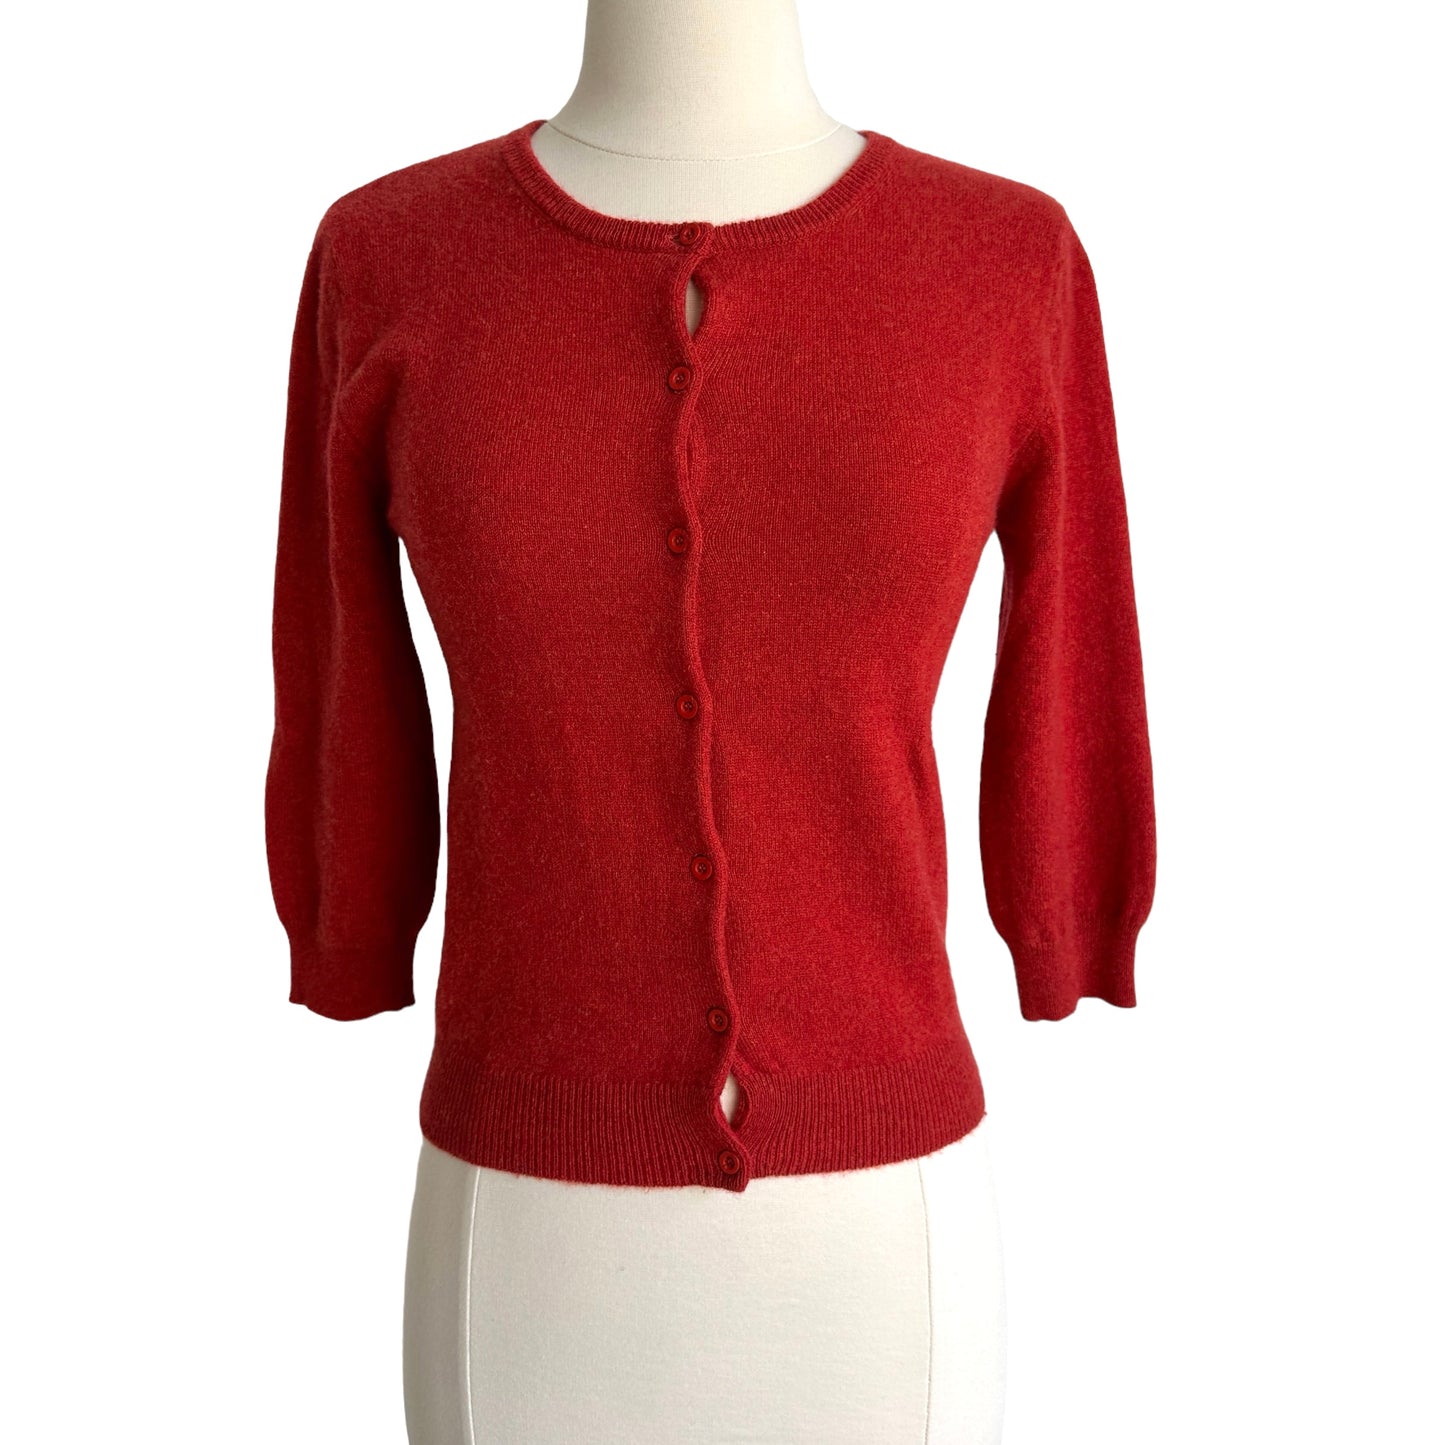 Red Cashmere Cardigan - XS